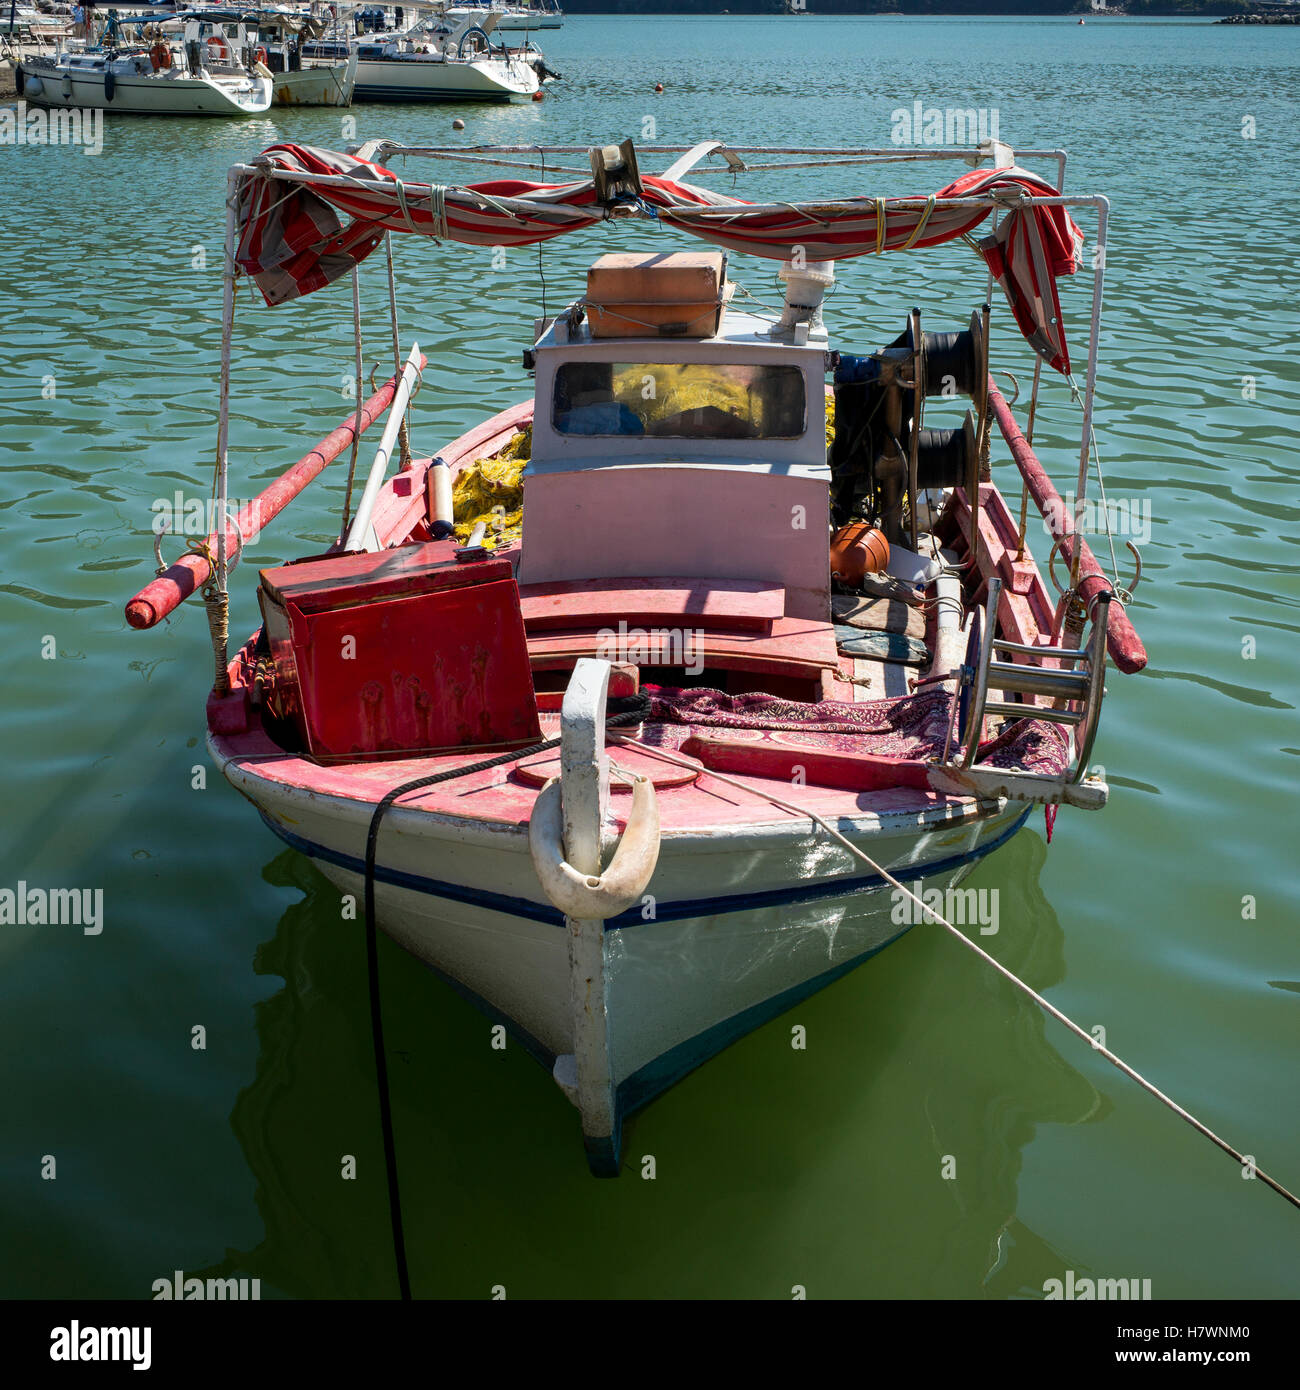 A fishing boat in a harbour; Skopelos Town, Skiathos, Greece Stock Photo